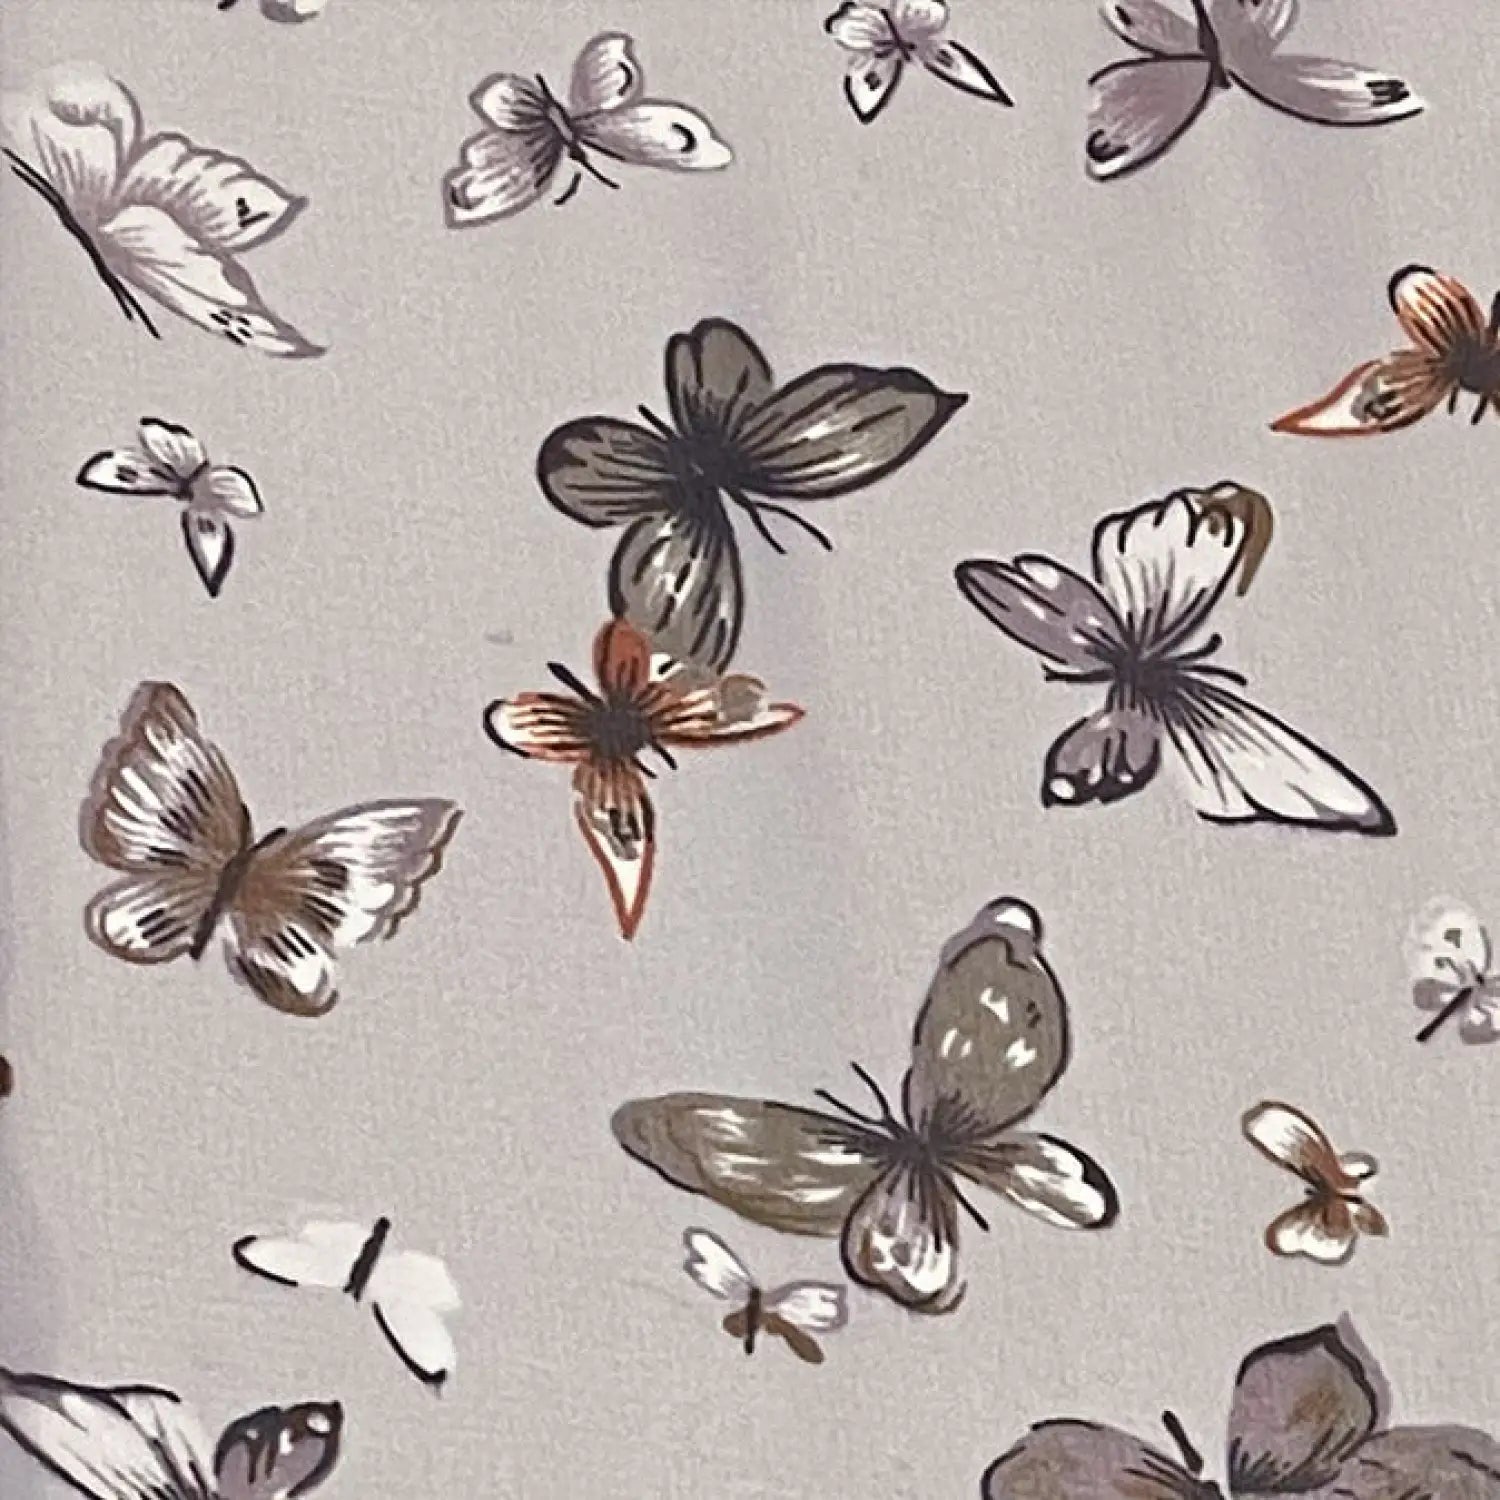 White and brown butterfly print scarf: lightweight, soft & versatile accessory.